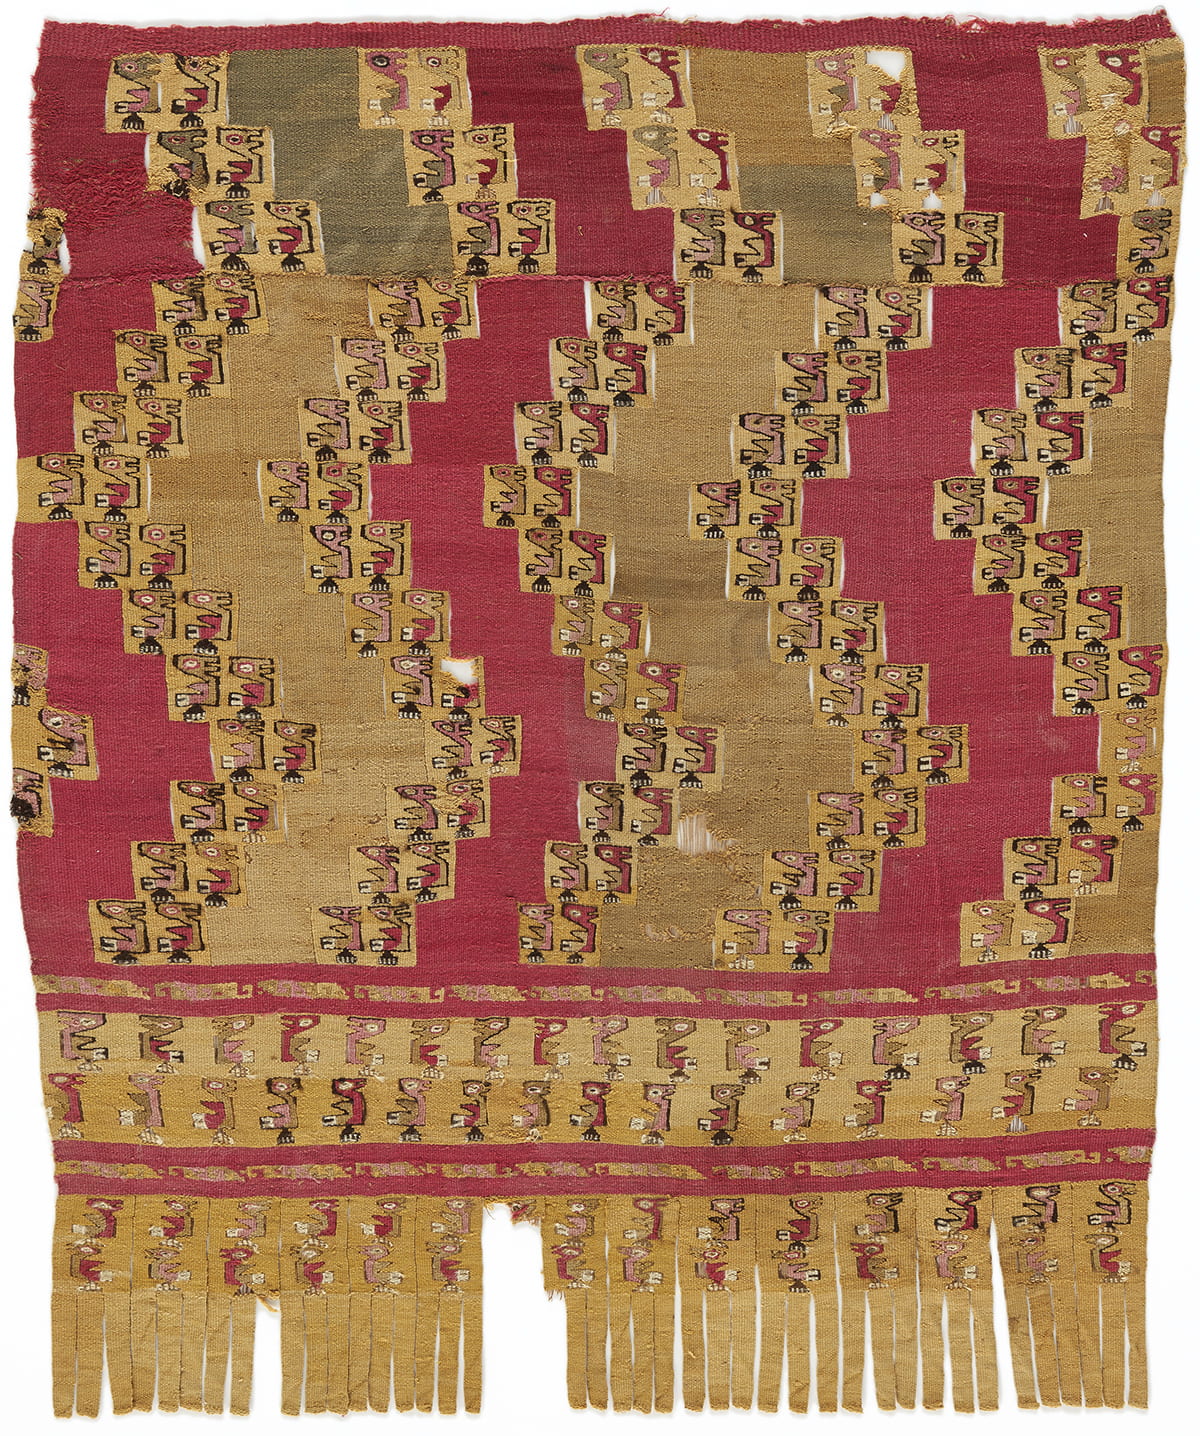 Fringed textile with design of small birds